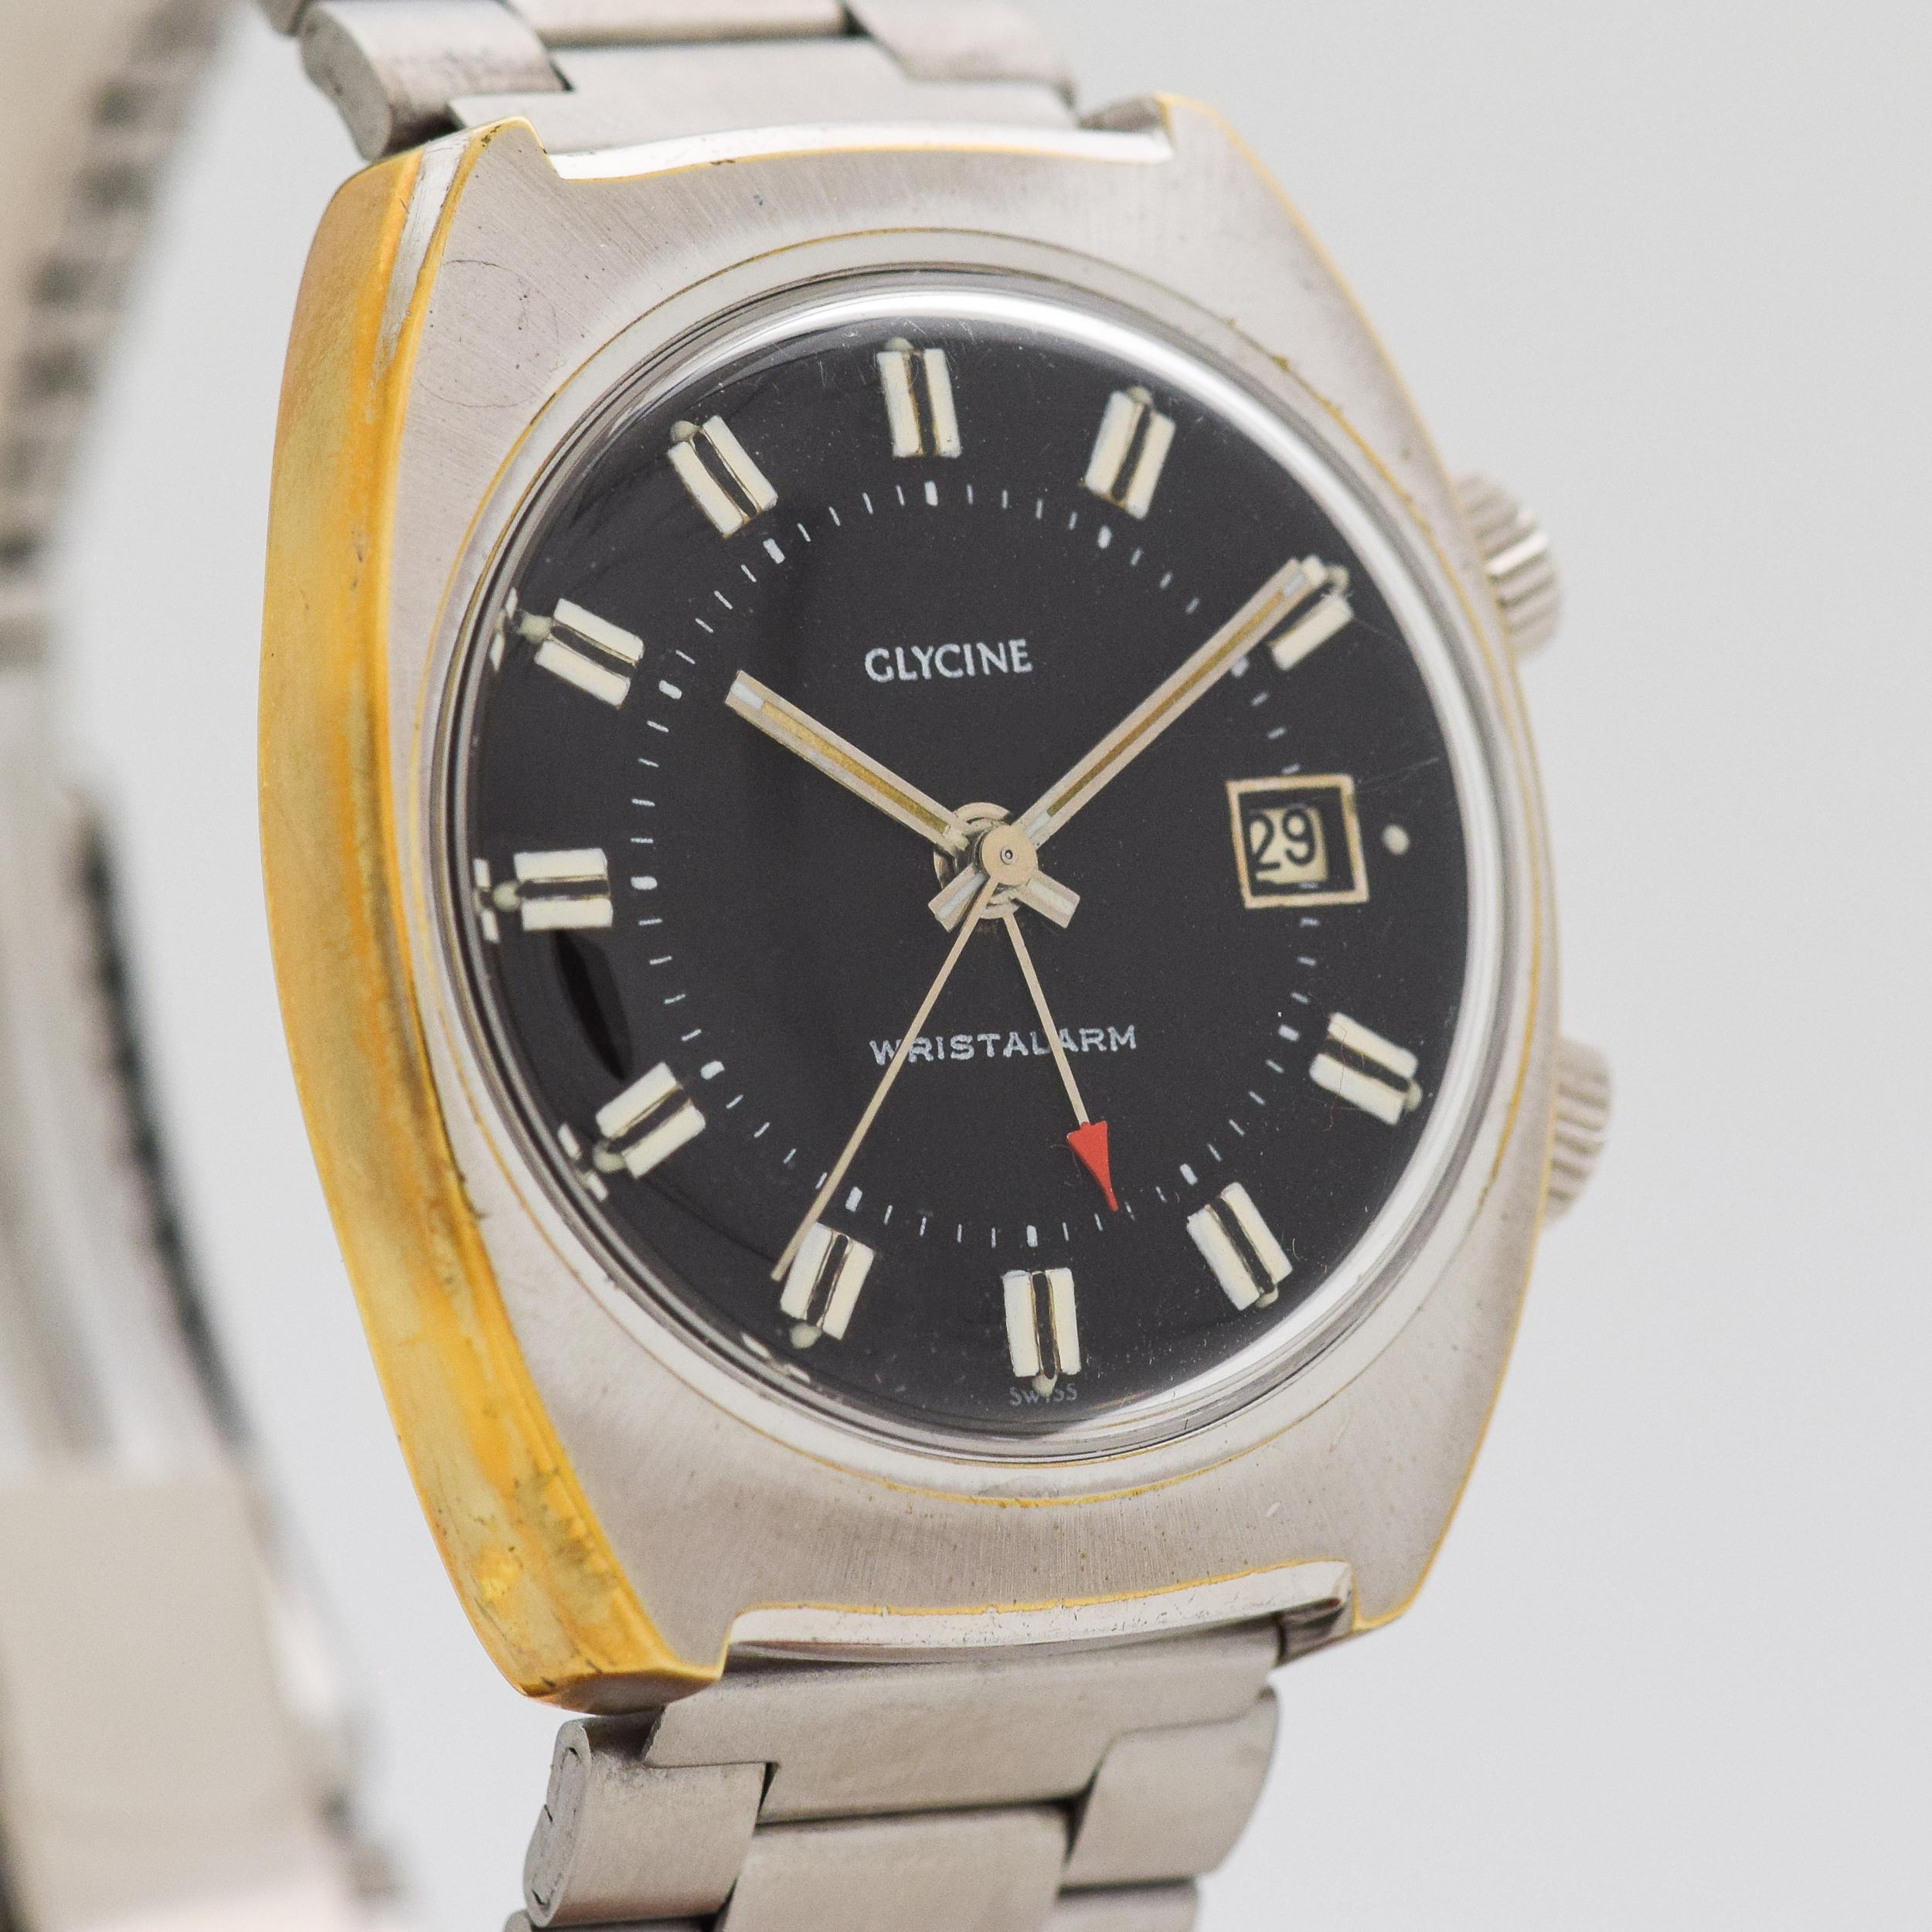 1970's Vintage Glycine Alarm Ref. 396/34 Chrome with Yellow Gold Plated Side of Case with Stainless Steel Case Back watch with Black Dial with Steel Bar Markers with Whit Paint and Black Inlay with Original Glycine Stainless Steel Bracelet. 35mm x